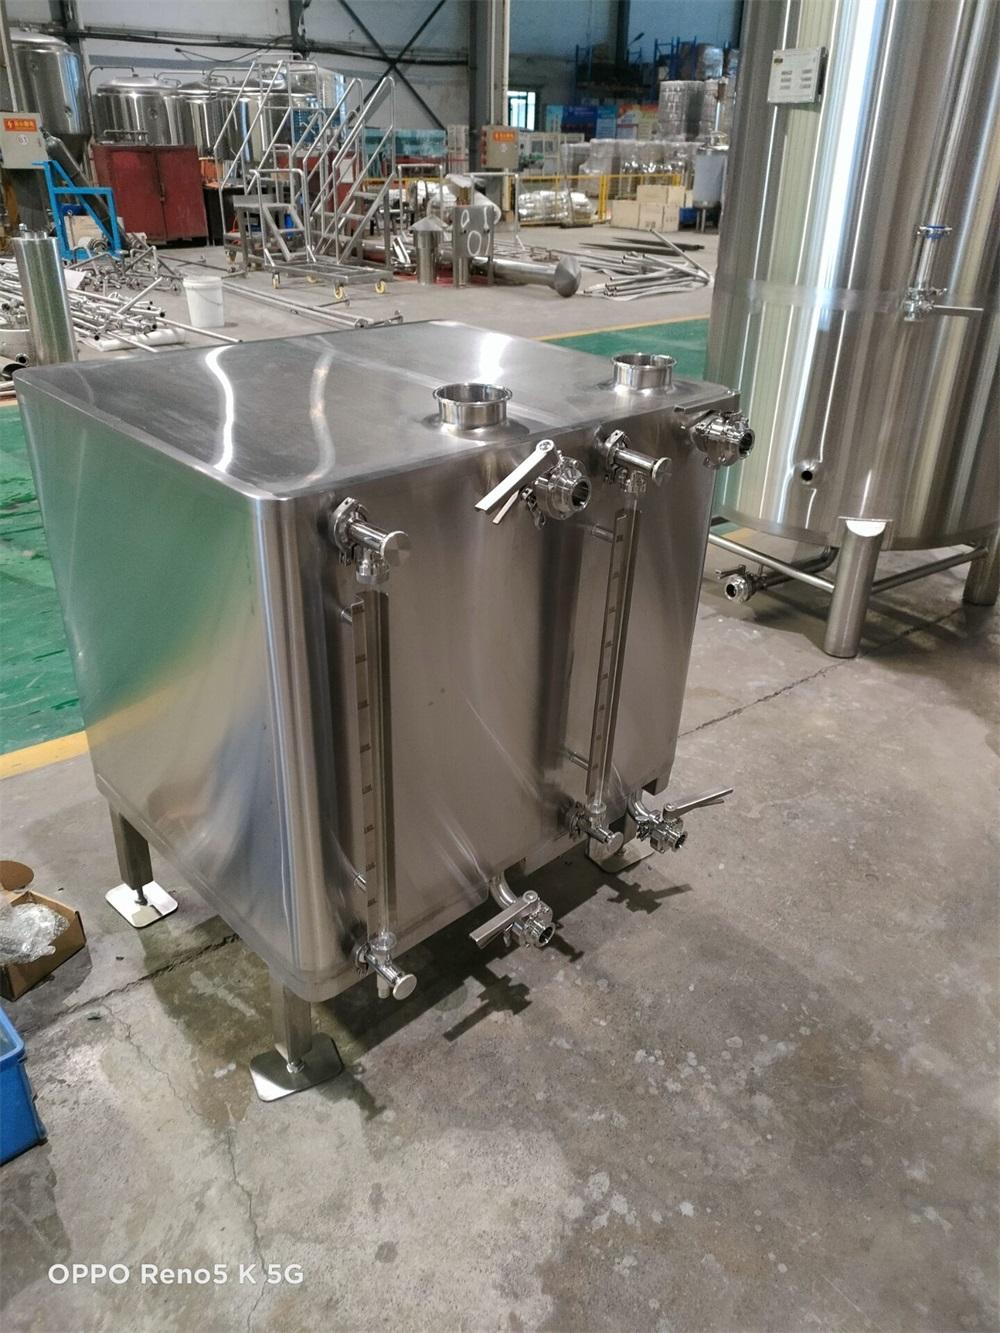 TIANTAI 1500L brewhouse, distillery system, whisky distill, mashing system, wash fermenter, mash/lauter tun, Tiantai beer equipment, beer beverage projects